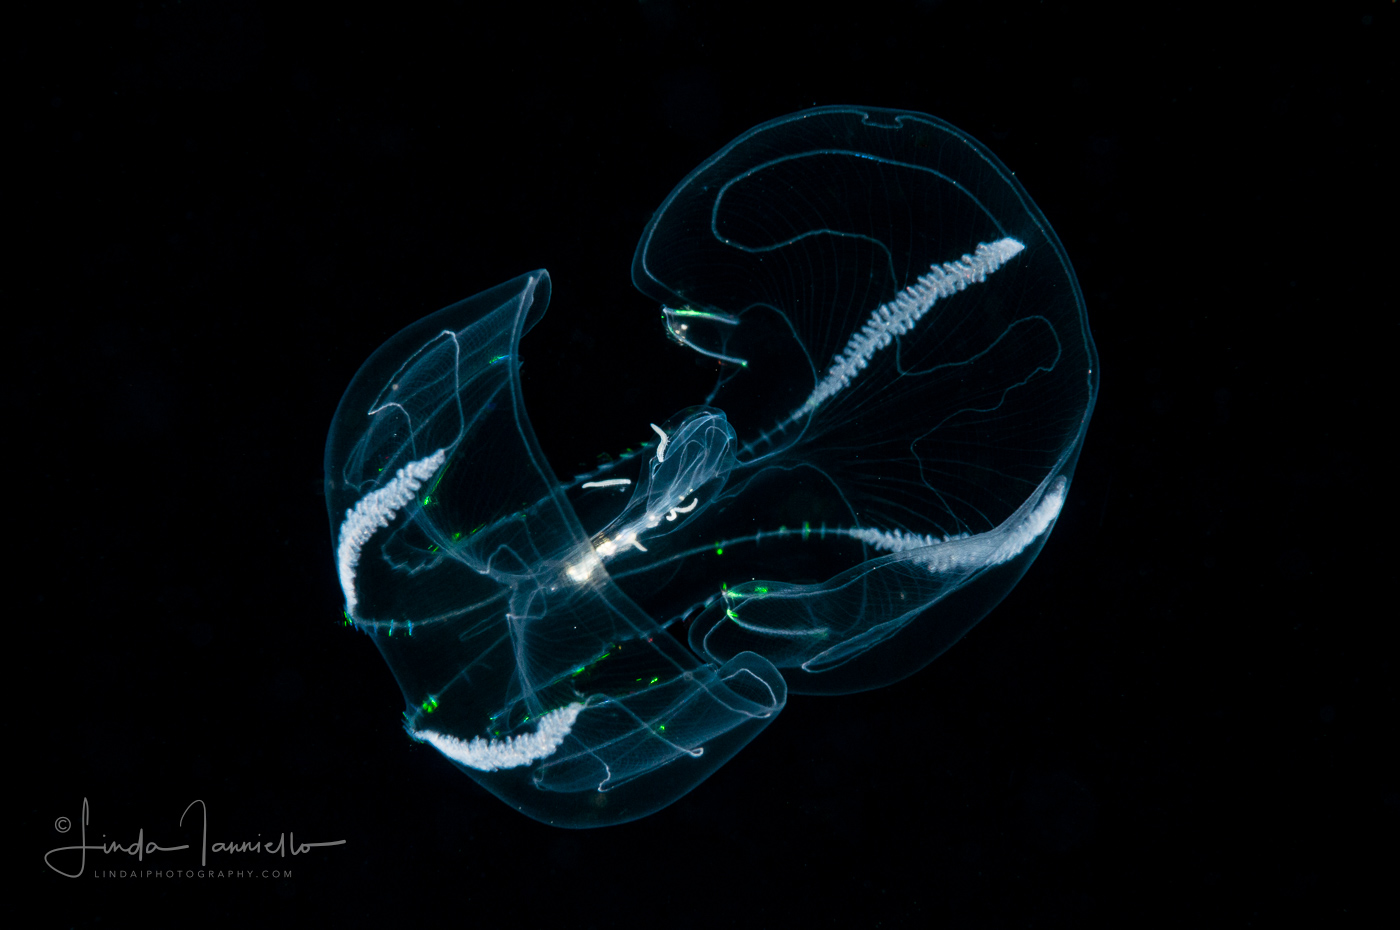 Ctenophore - Winged Comb Jelly - Cydippida Order - Ocyropsis maculata immaculata